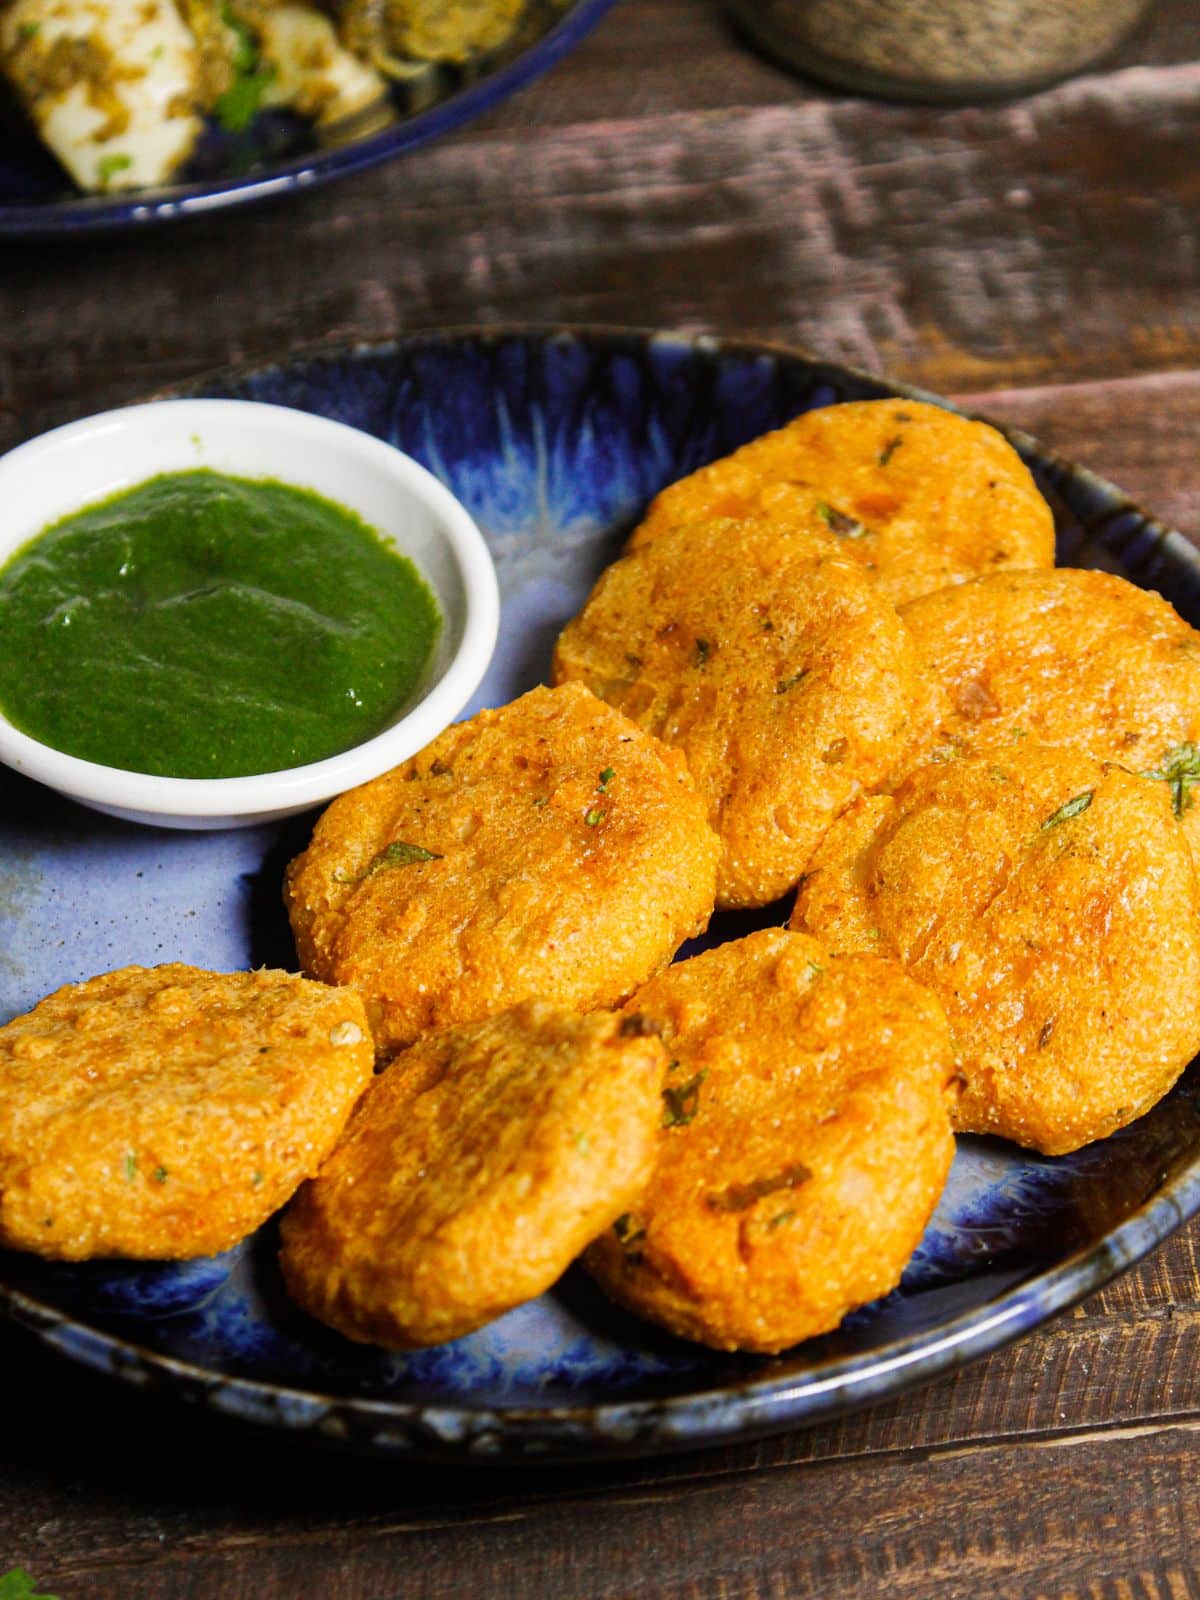 Enjoy hot and crunchy Semolina and Potato Breakfast Cutlets with tea or coffee